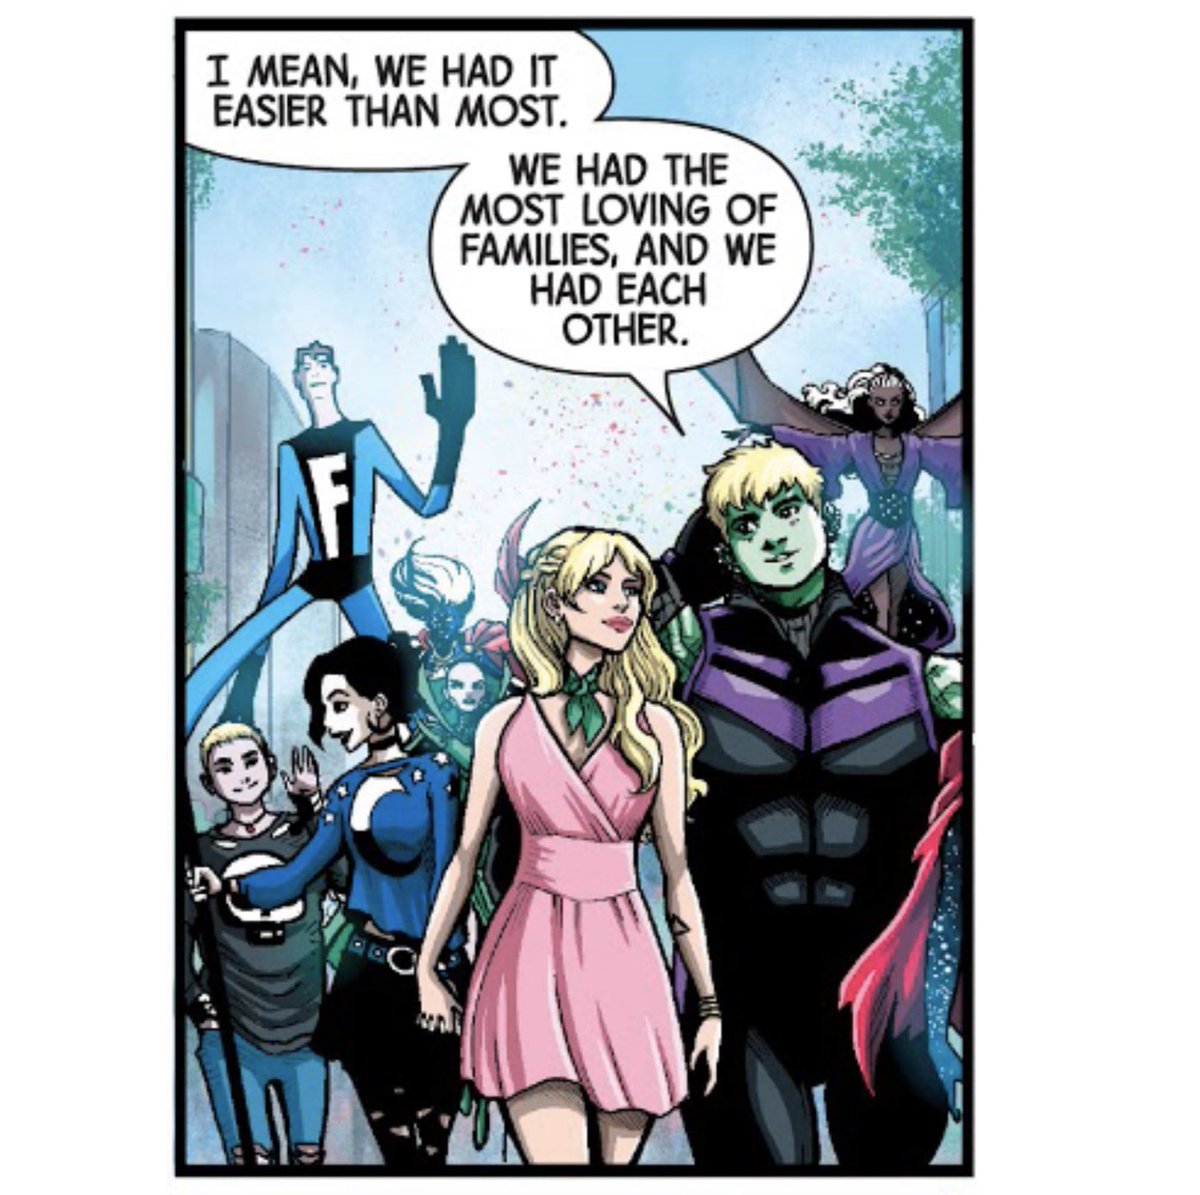 Hulkling is having a similar conversation with Karolina and Nico. The Young Avengers and the Runaways have crossed paths many times and these two couples of alien heirs and magic users have a lot in common.